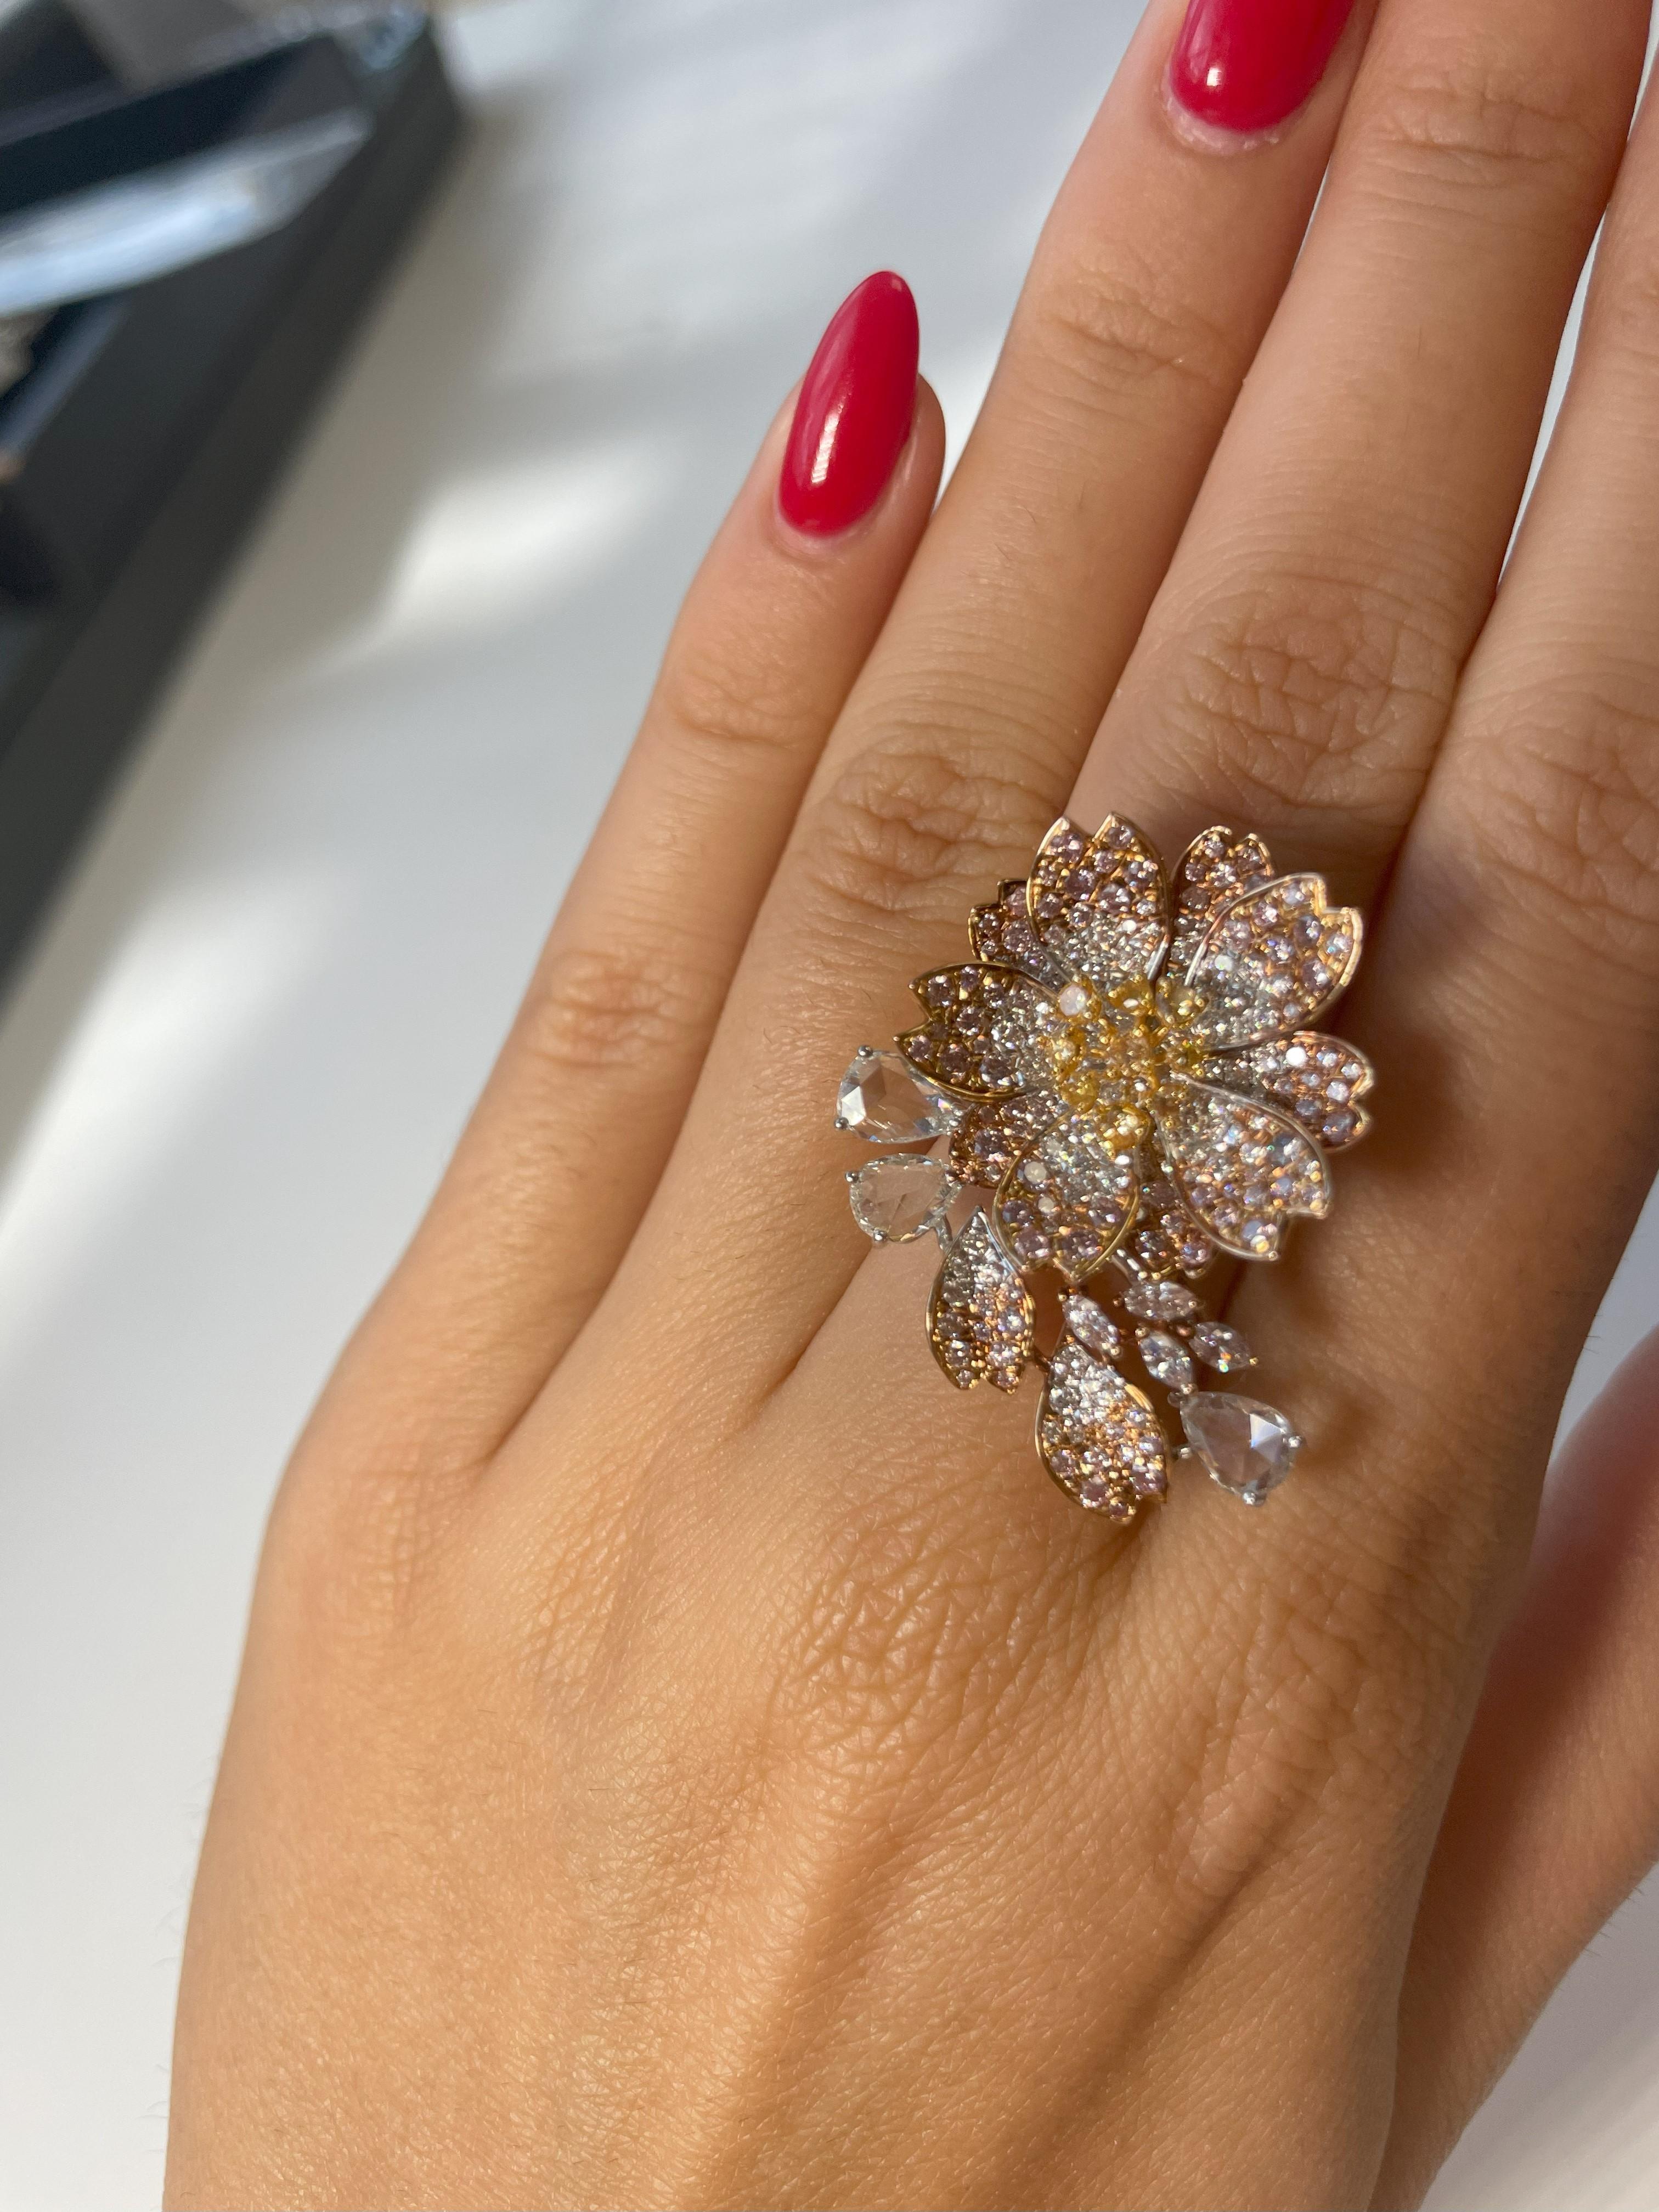 This exquisite Art Nouveau-inspired masterpiece, featuring a stunning 0.91 Carat Pink Diamond in Marquise and Round Brilliant cuts, accompanied by a 0.24 Carat Yellow Diamond and embellished with 1.54 Carats of colorless diamonds. This enchanting